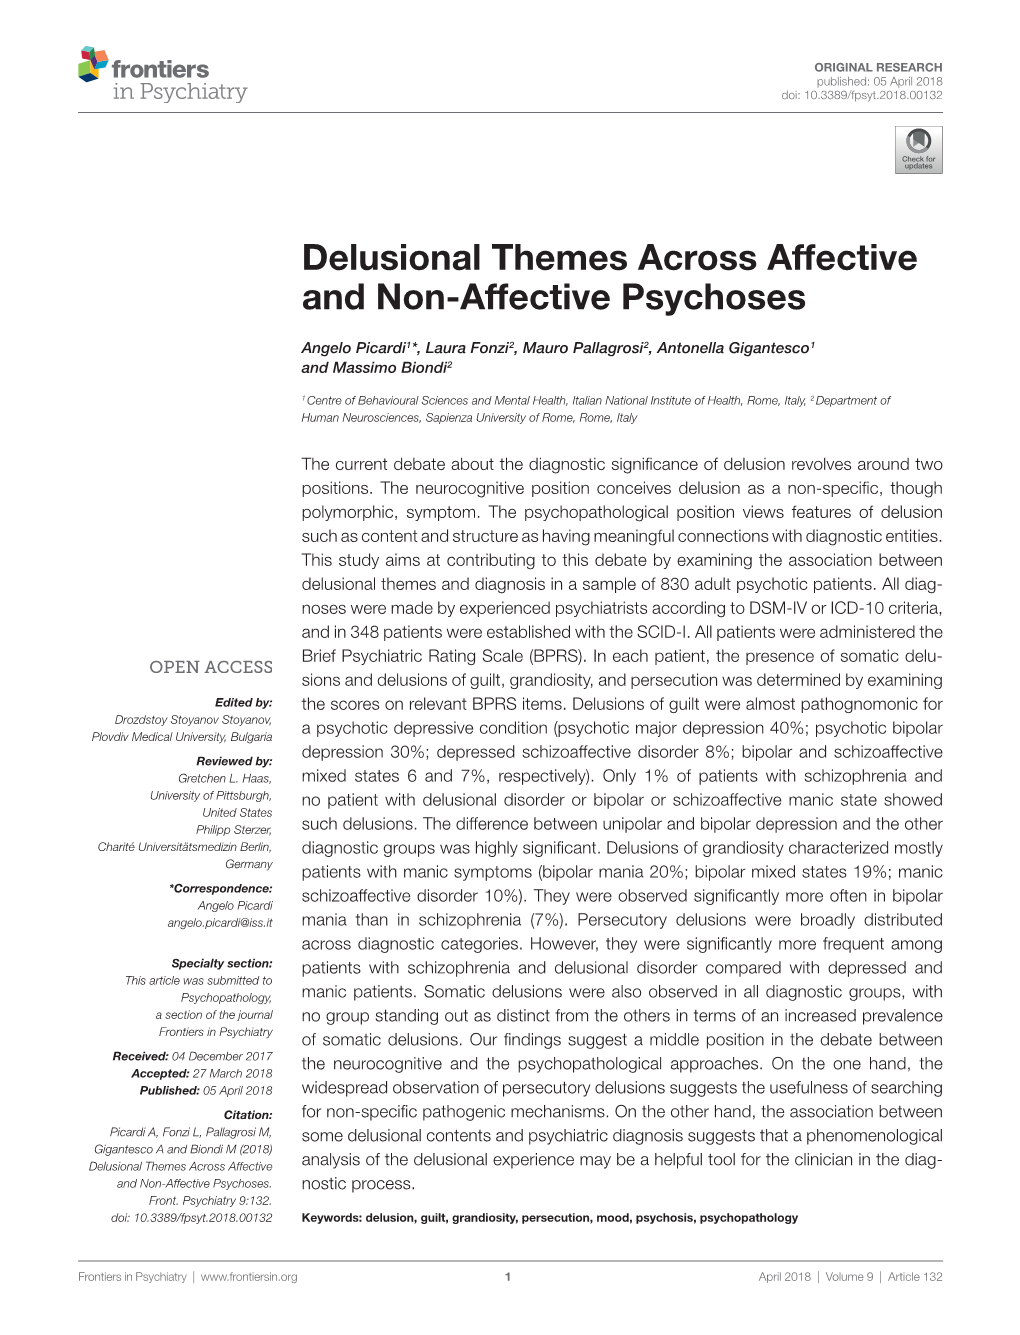 Delusional Themes Across Affective and Non-Affective Psychoses